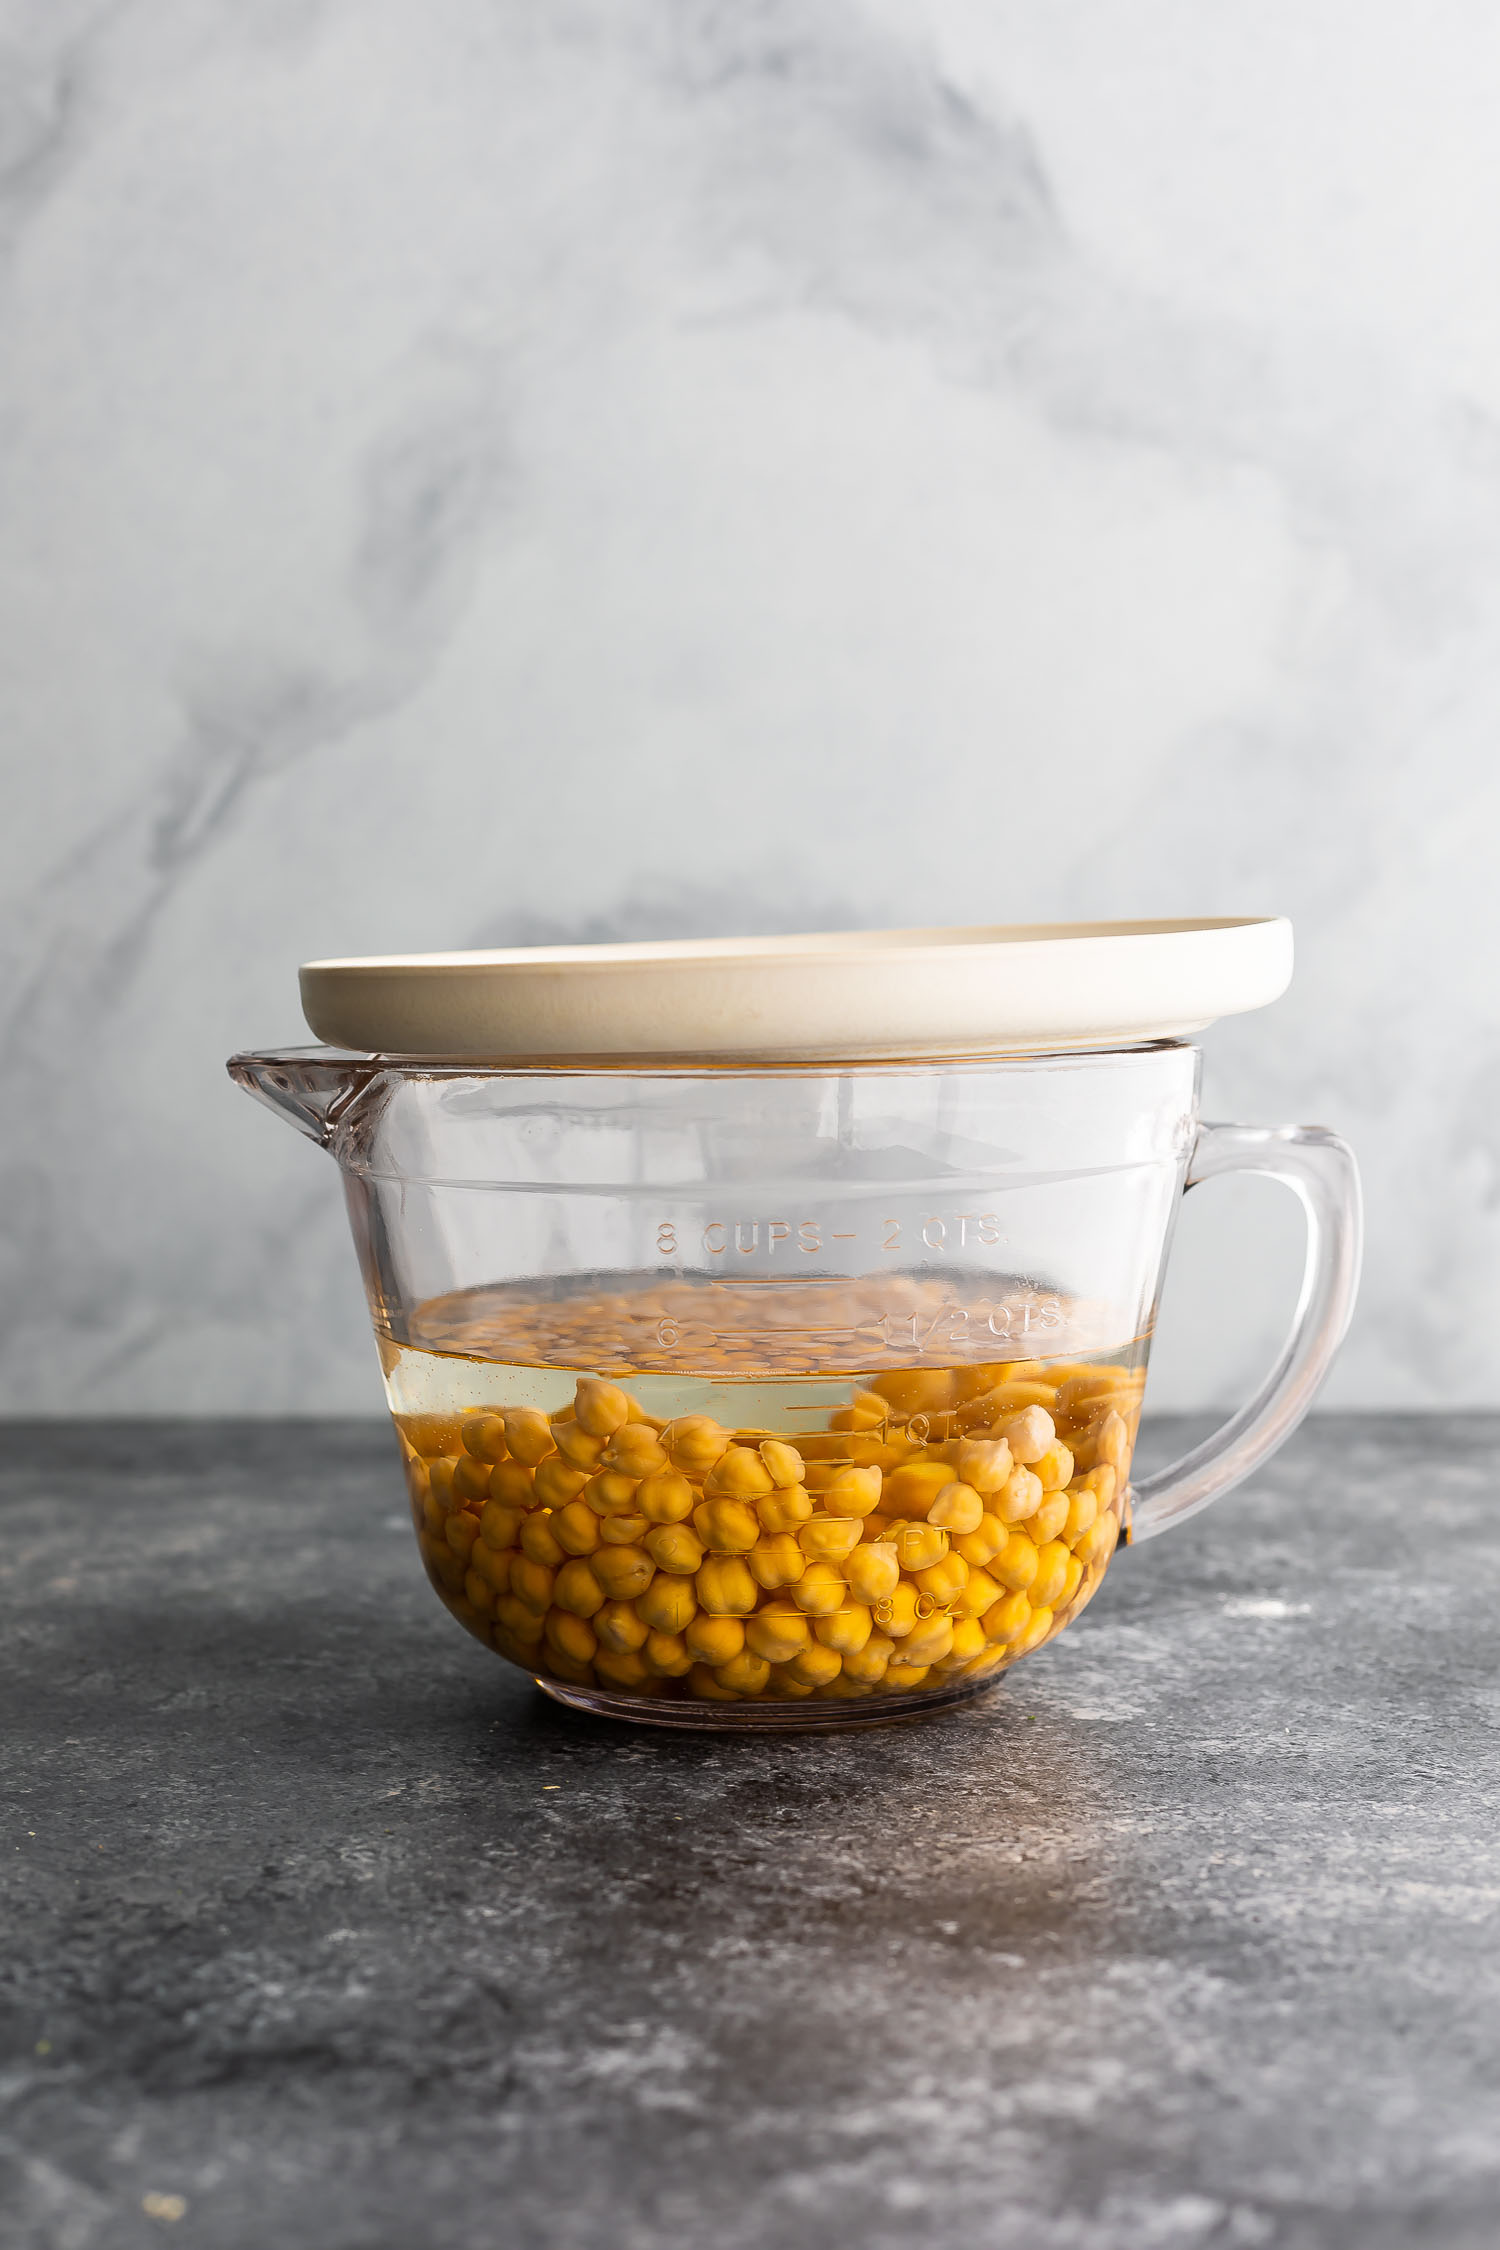 dried chickpeas soaking in large measuring cup, covered with a plate